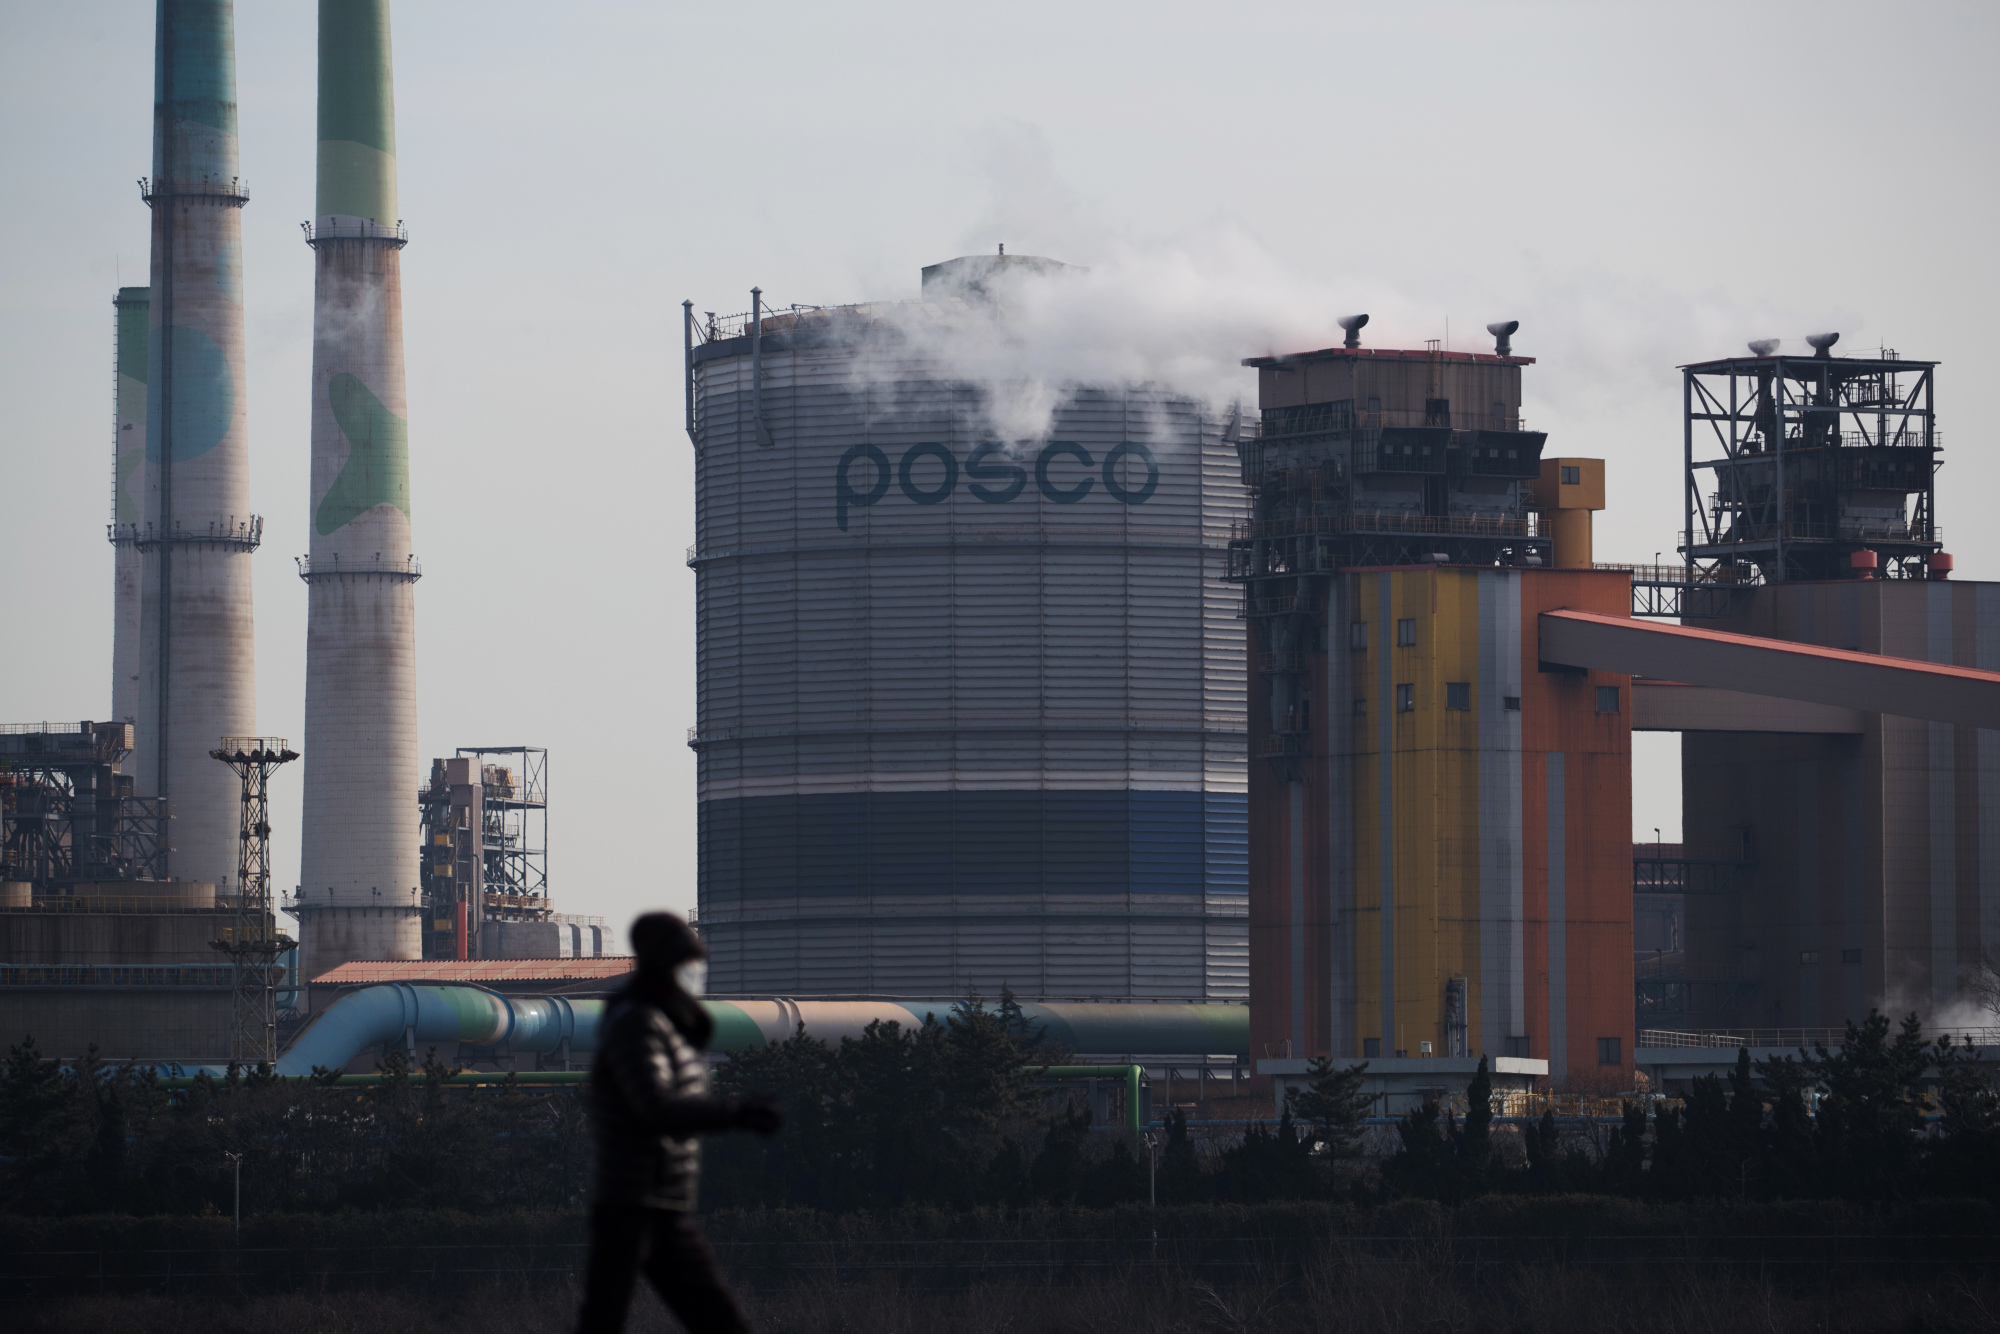 South Korea's Posco to focus on 'greening' steel business after spin-off -  EUROMETAL